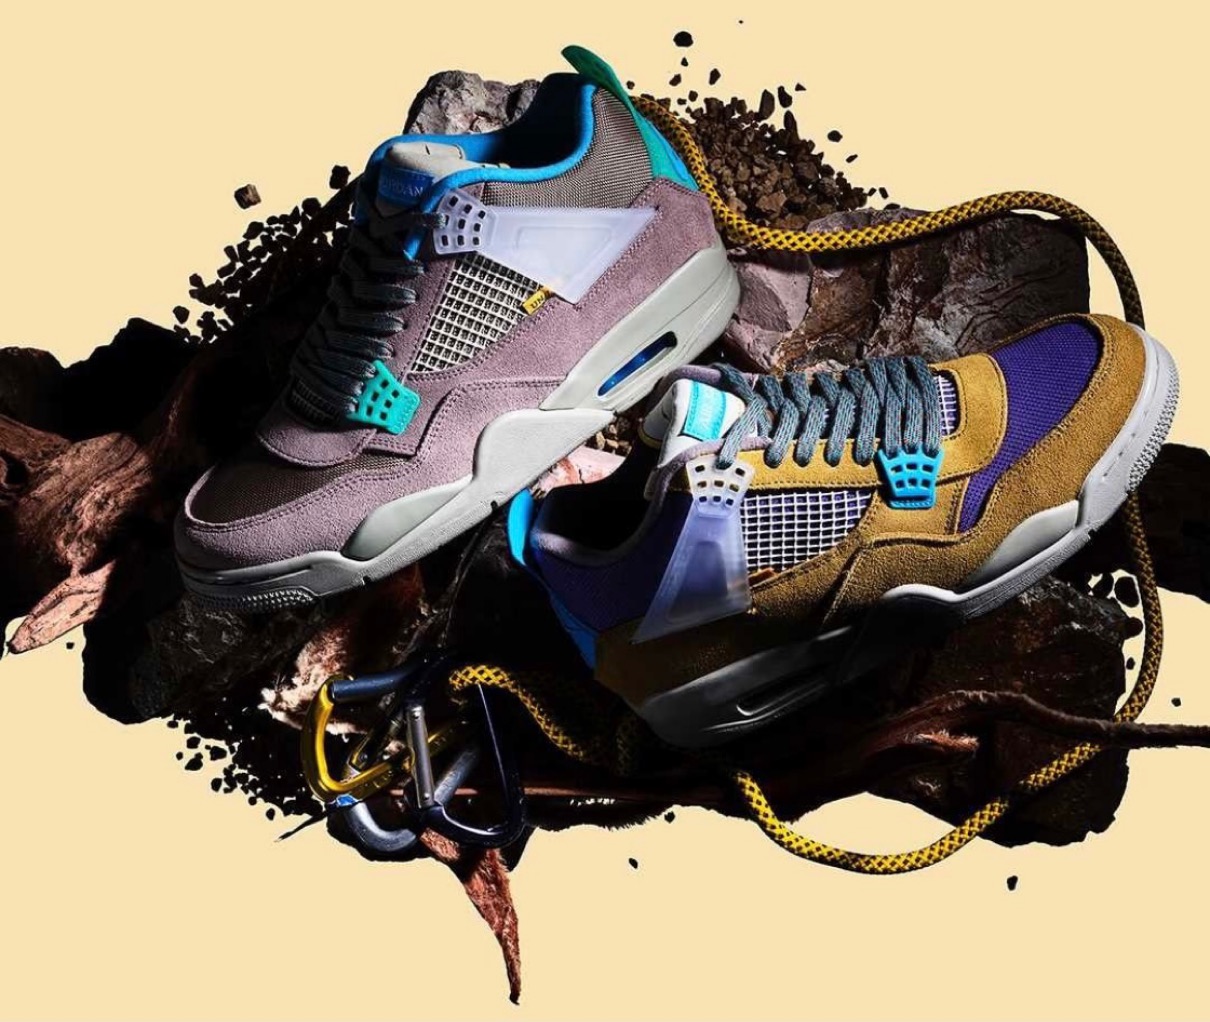 Union × Nike】Air Jordan 4 Retro SP “Tent and Trail” Collectionが 